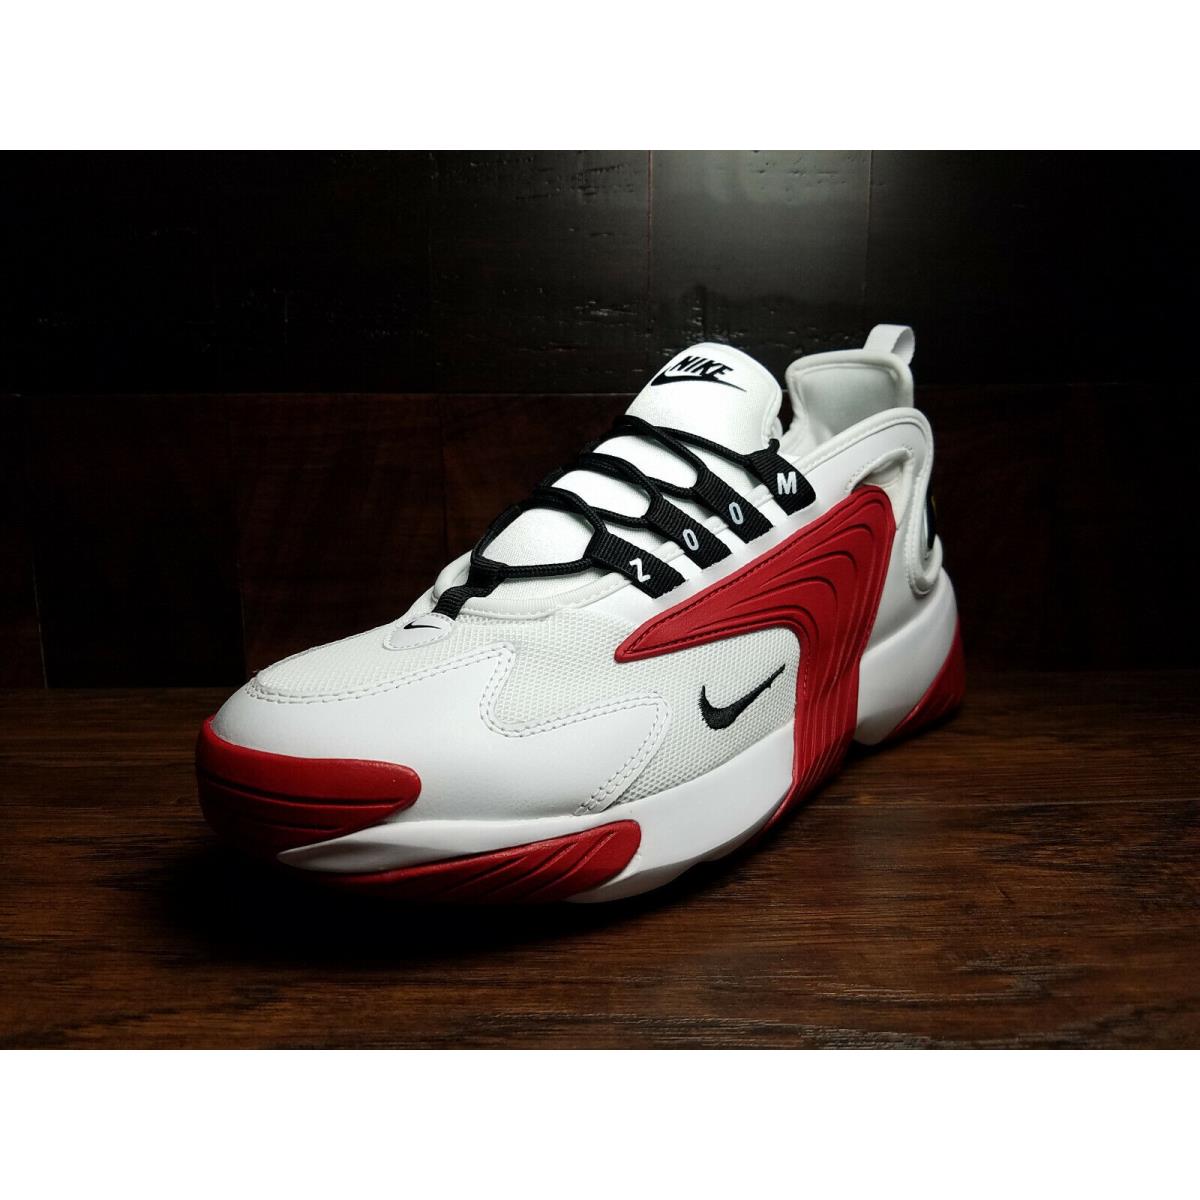 Nike shoes Zoom - White / Black / Red 0